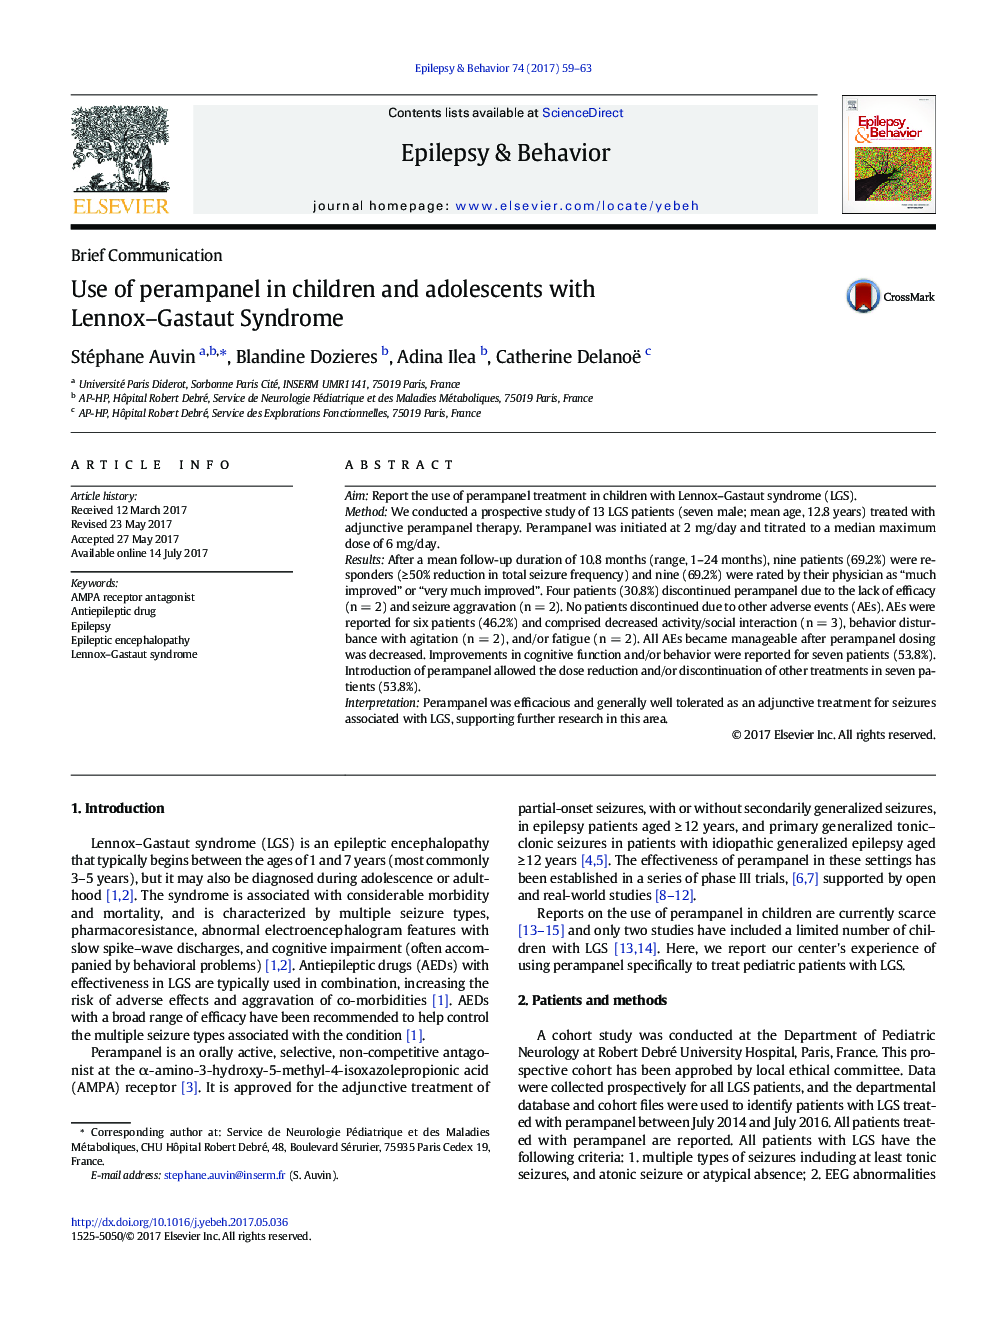 Brief CommunicationUse of perampanel in children and adolescents with Lennox-Gastaut Syndrome